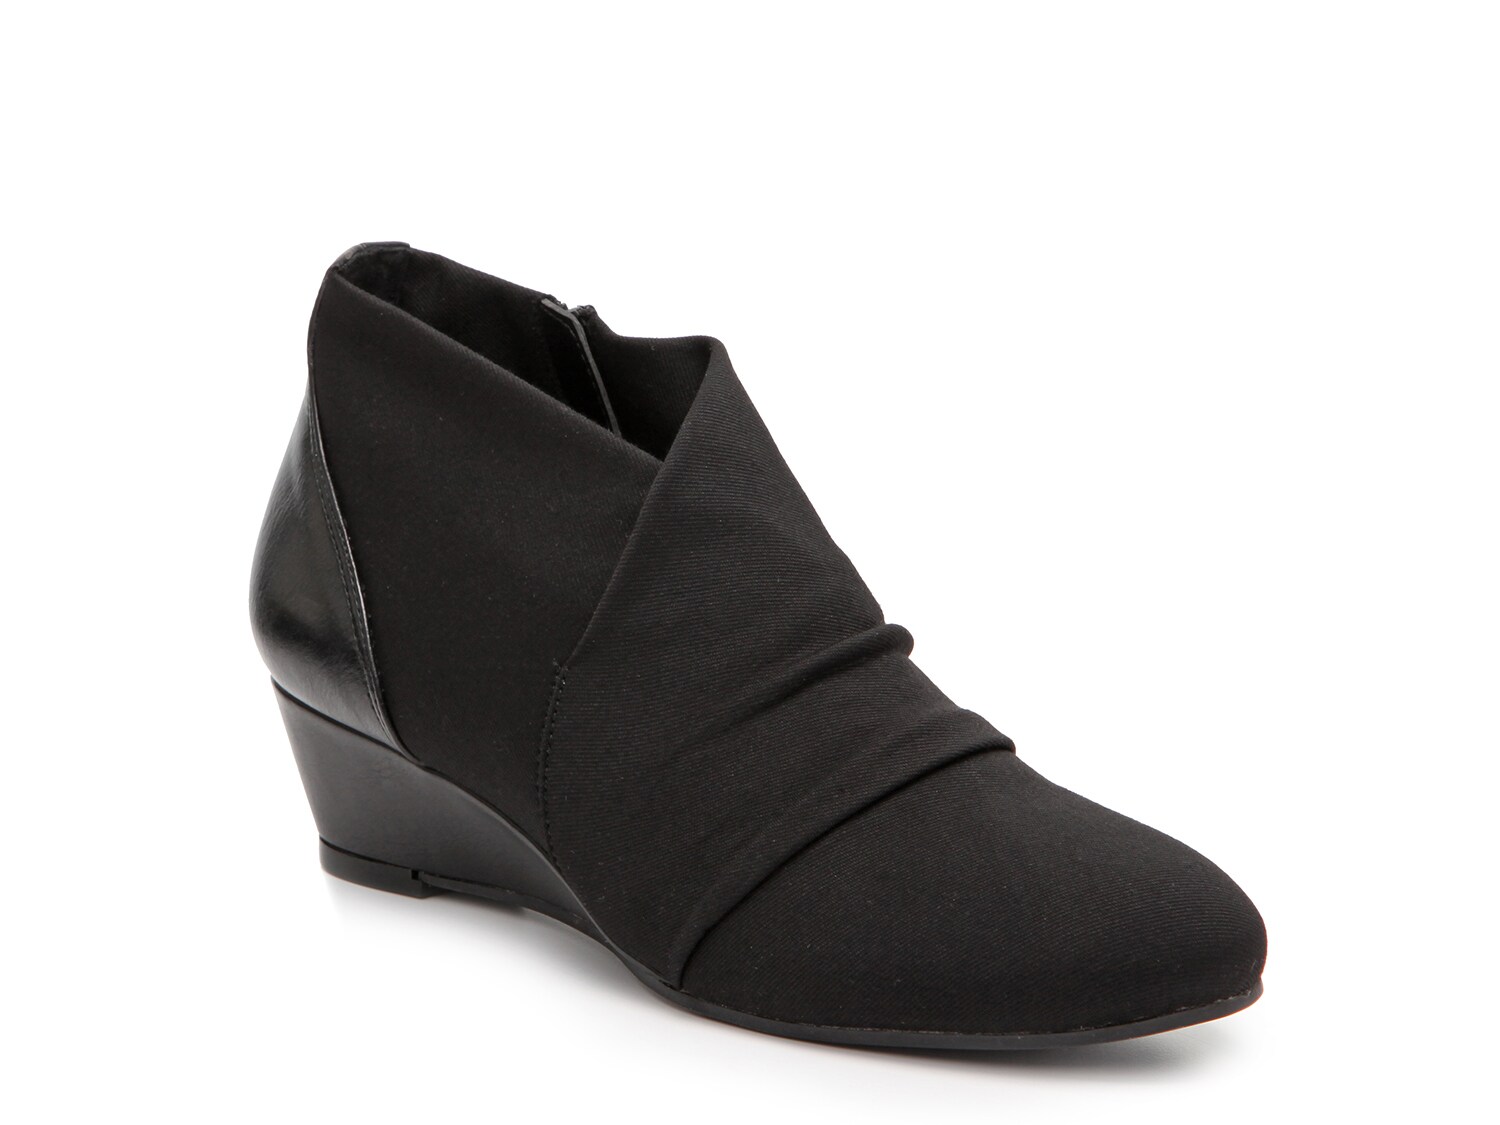 Impo Galina Wedge Bootie Women's Shoes 